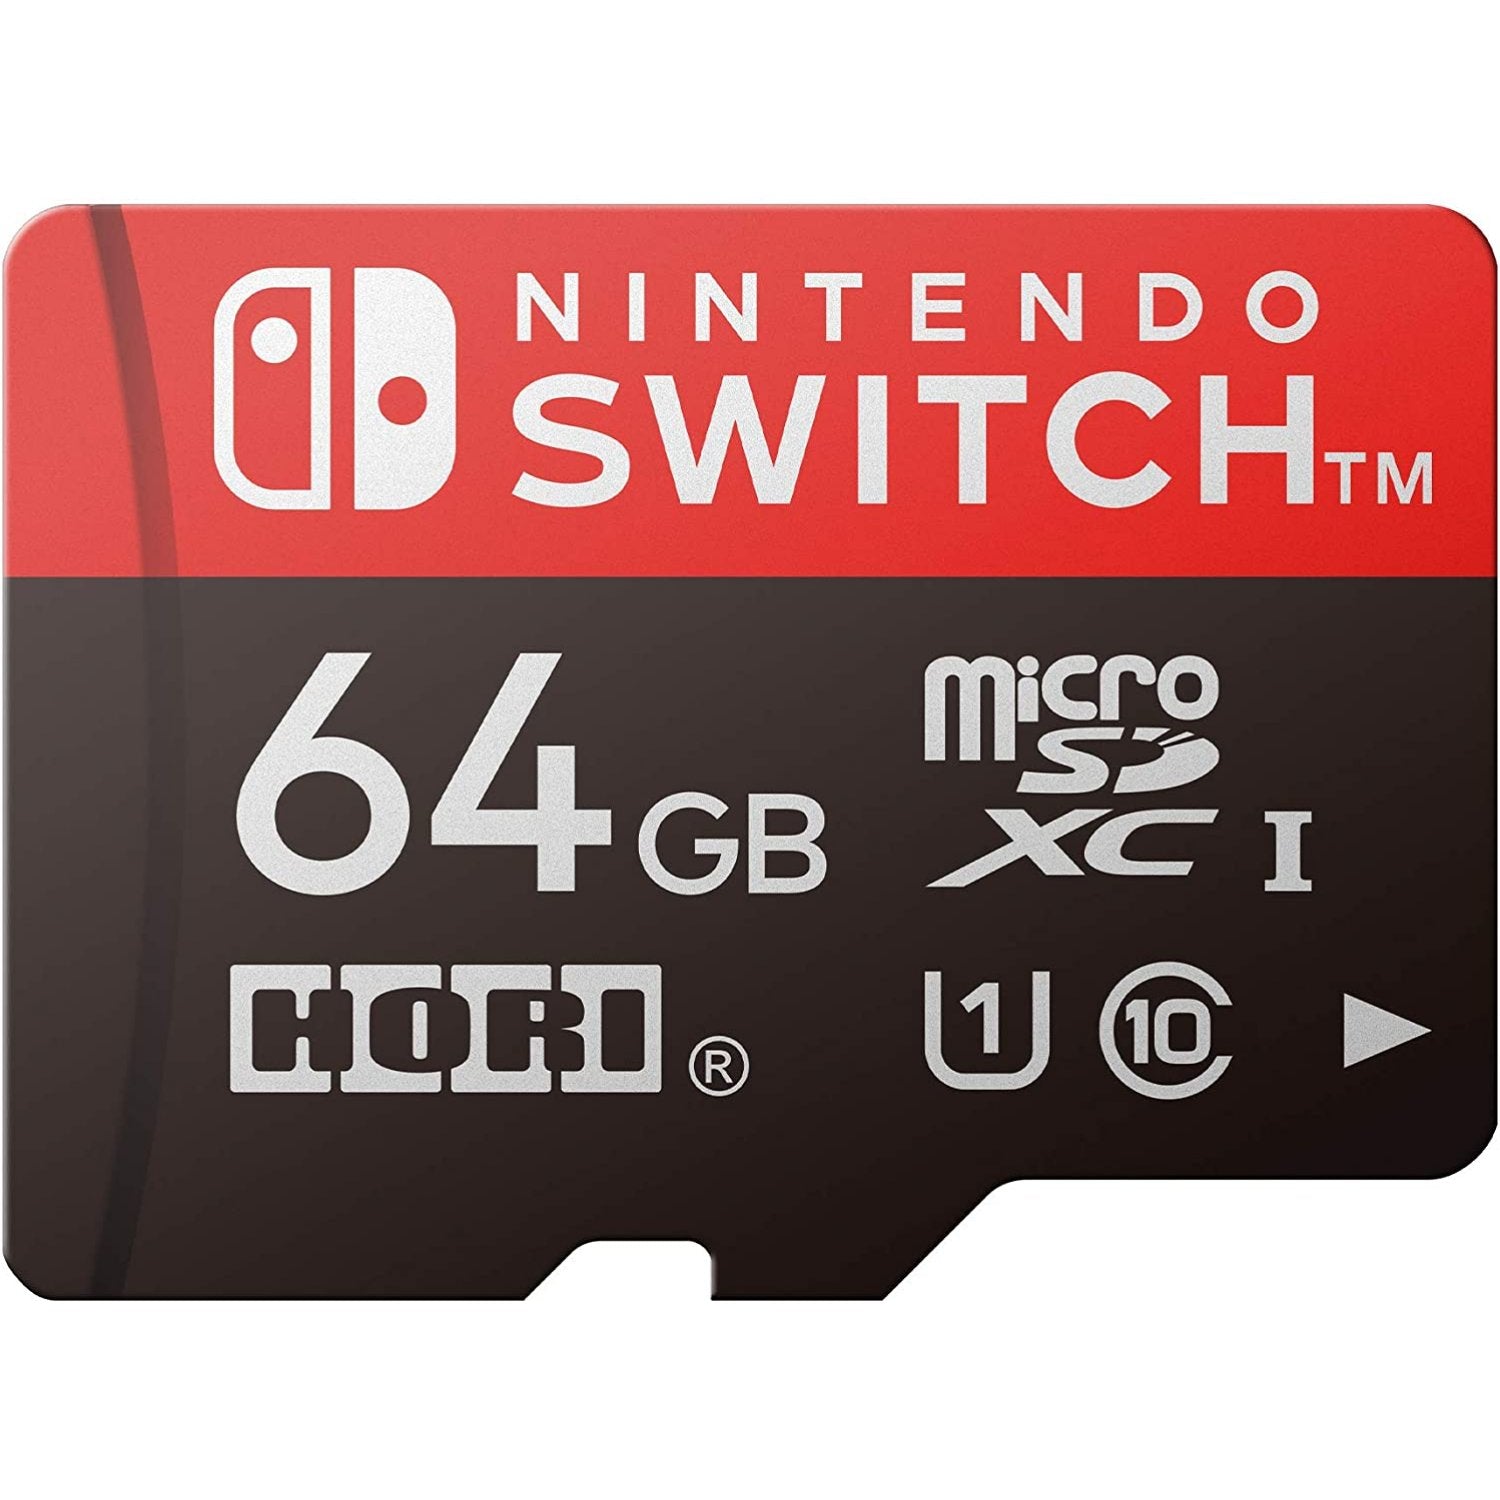 HORI NSW Monster Hunter Rise microSD Card 64GB & Card Case for 6 (AD19-001)